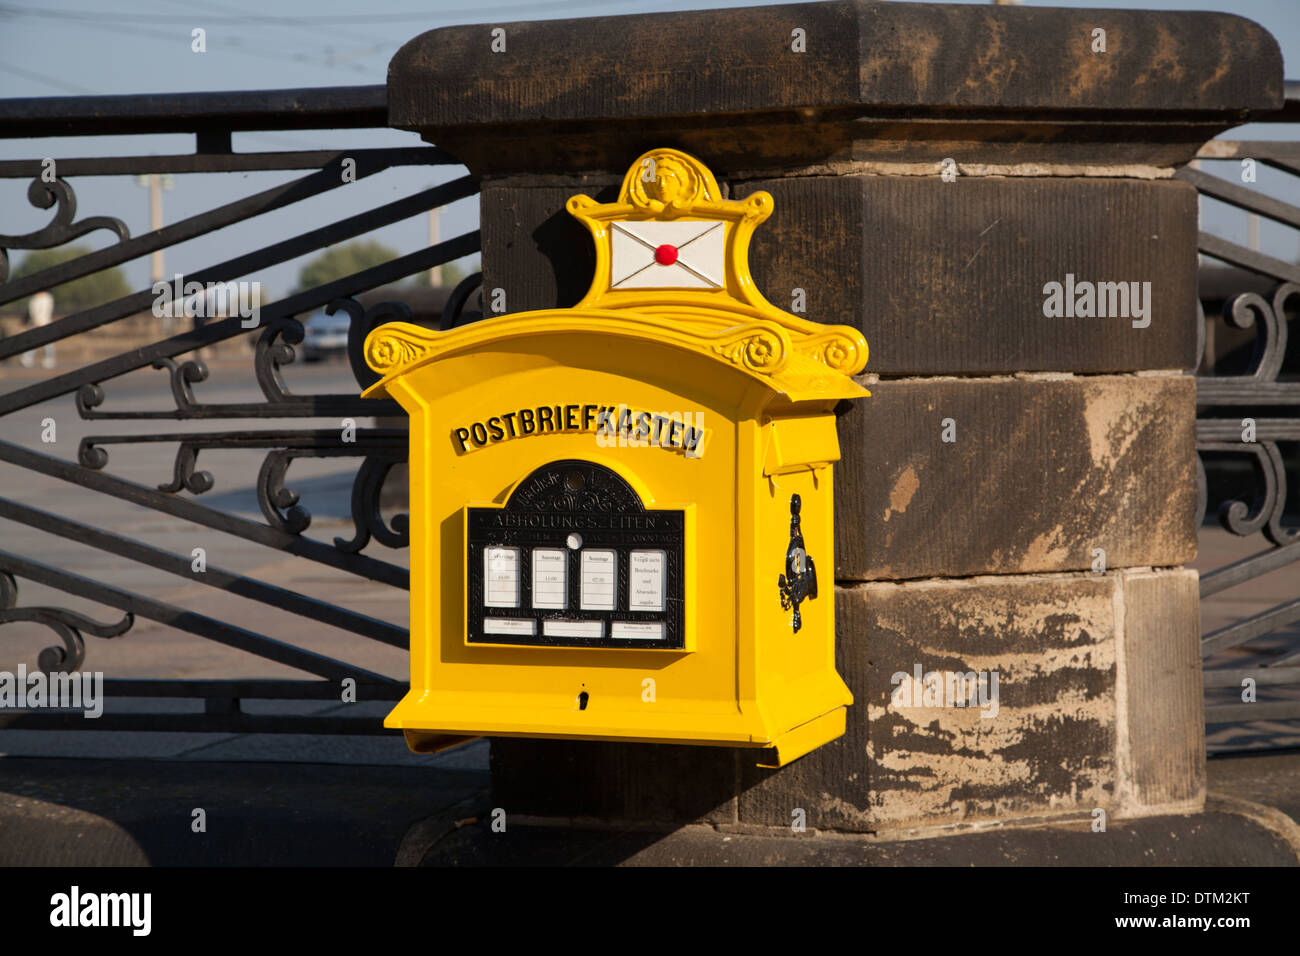 Postbriefkasten High Resolution Stock Photography and Images - Alamy